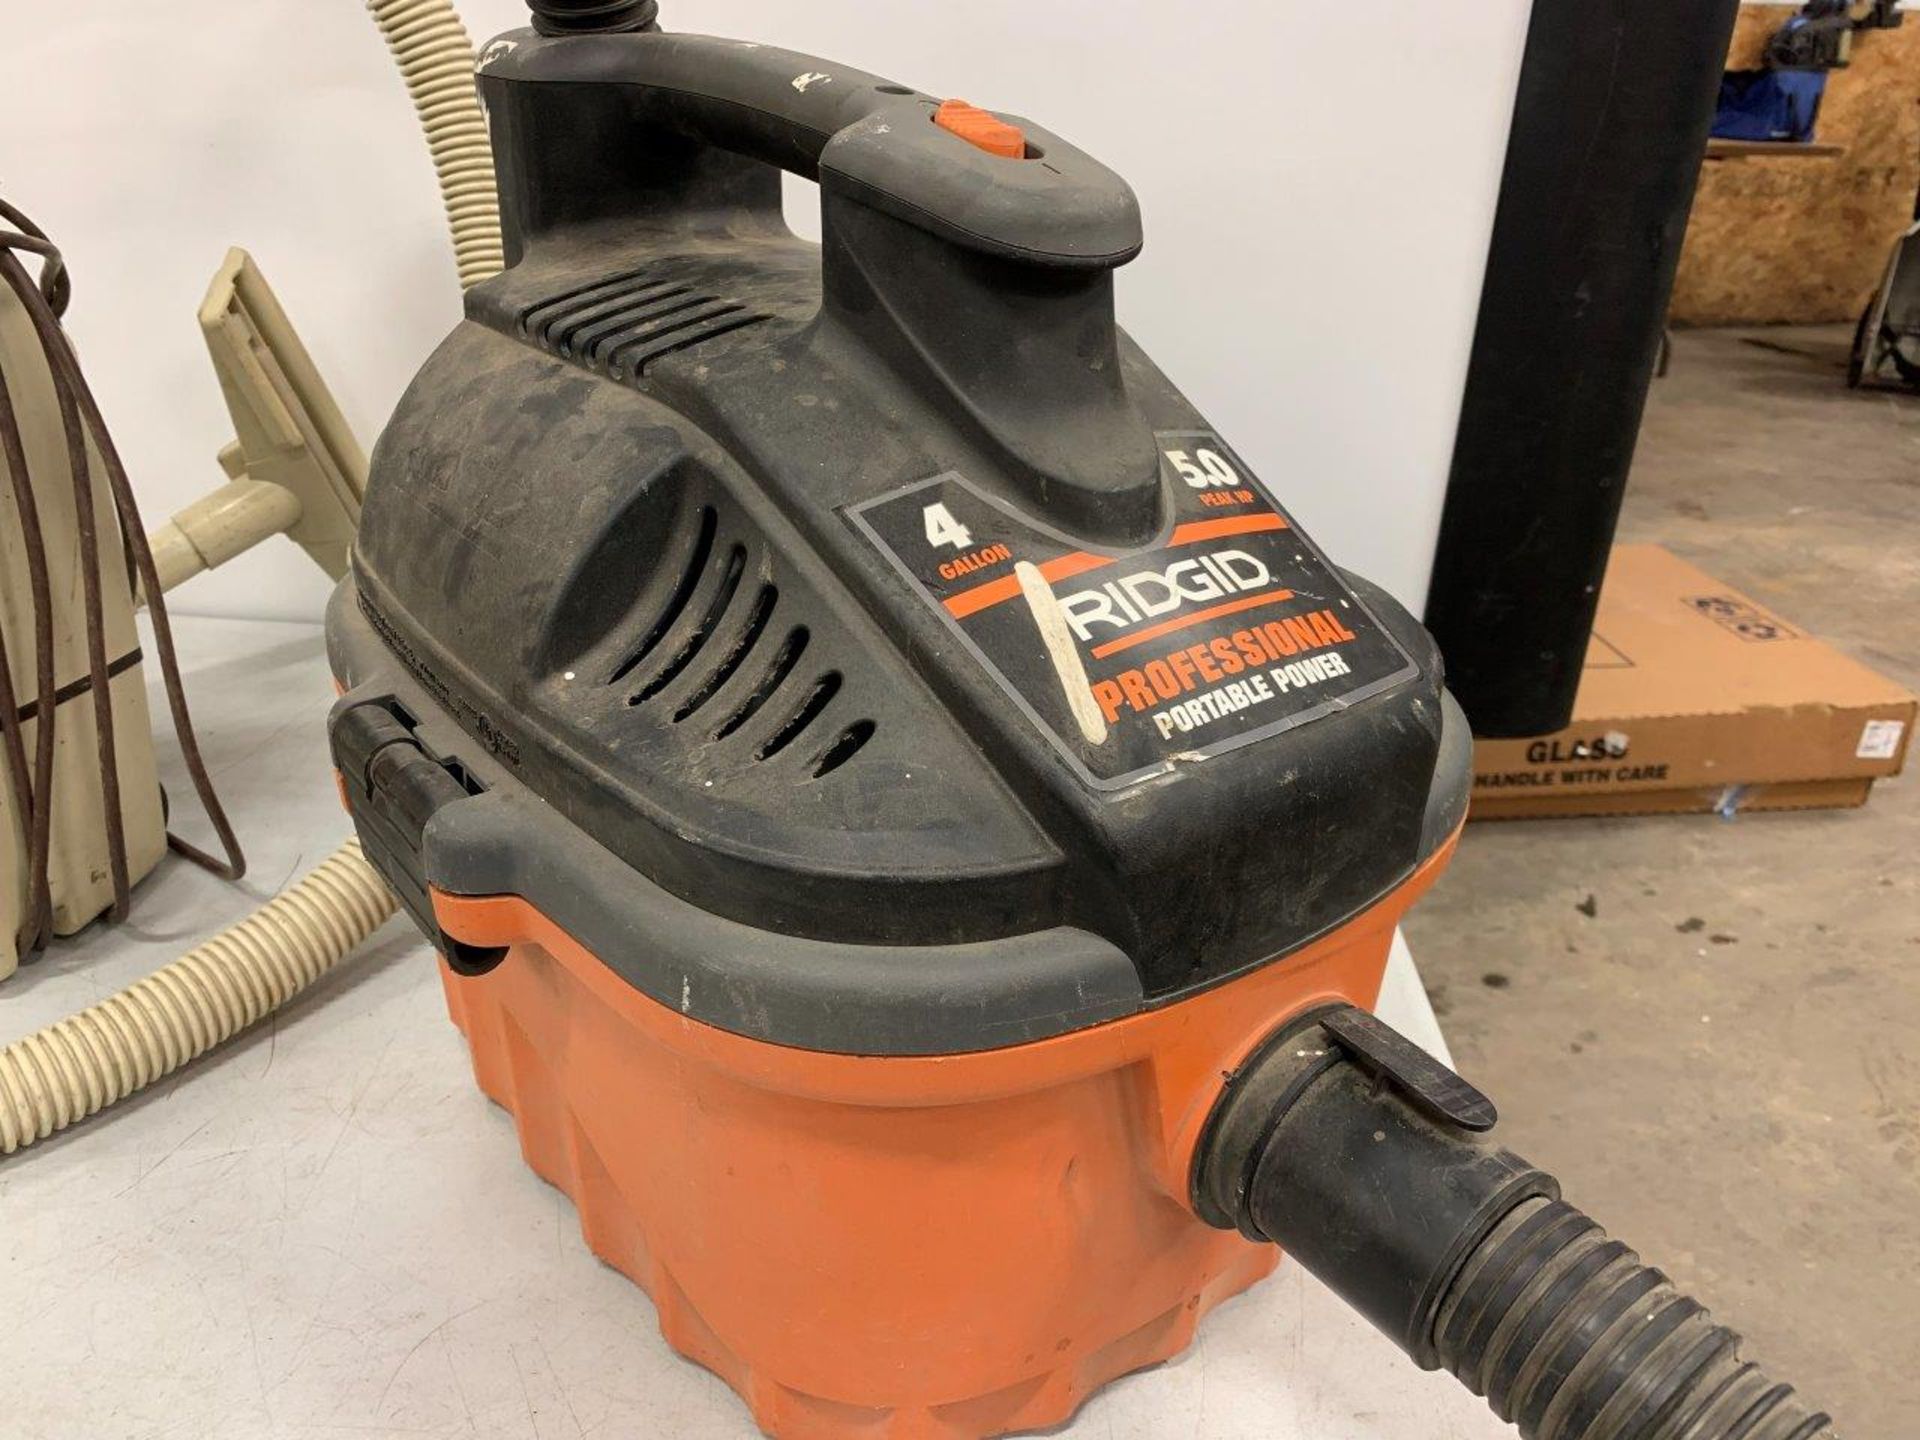 RIDGID PORTABLE WE/DRY SHOP VACUUM W/ ATTACHMENTS AND PERFORMER VACUUM - Image 4 of 6